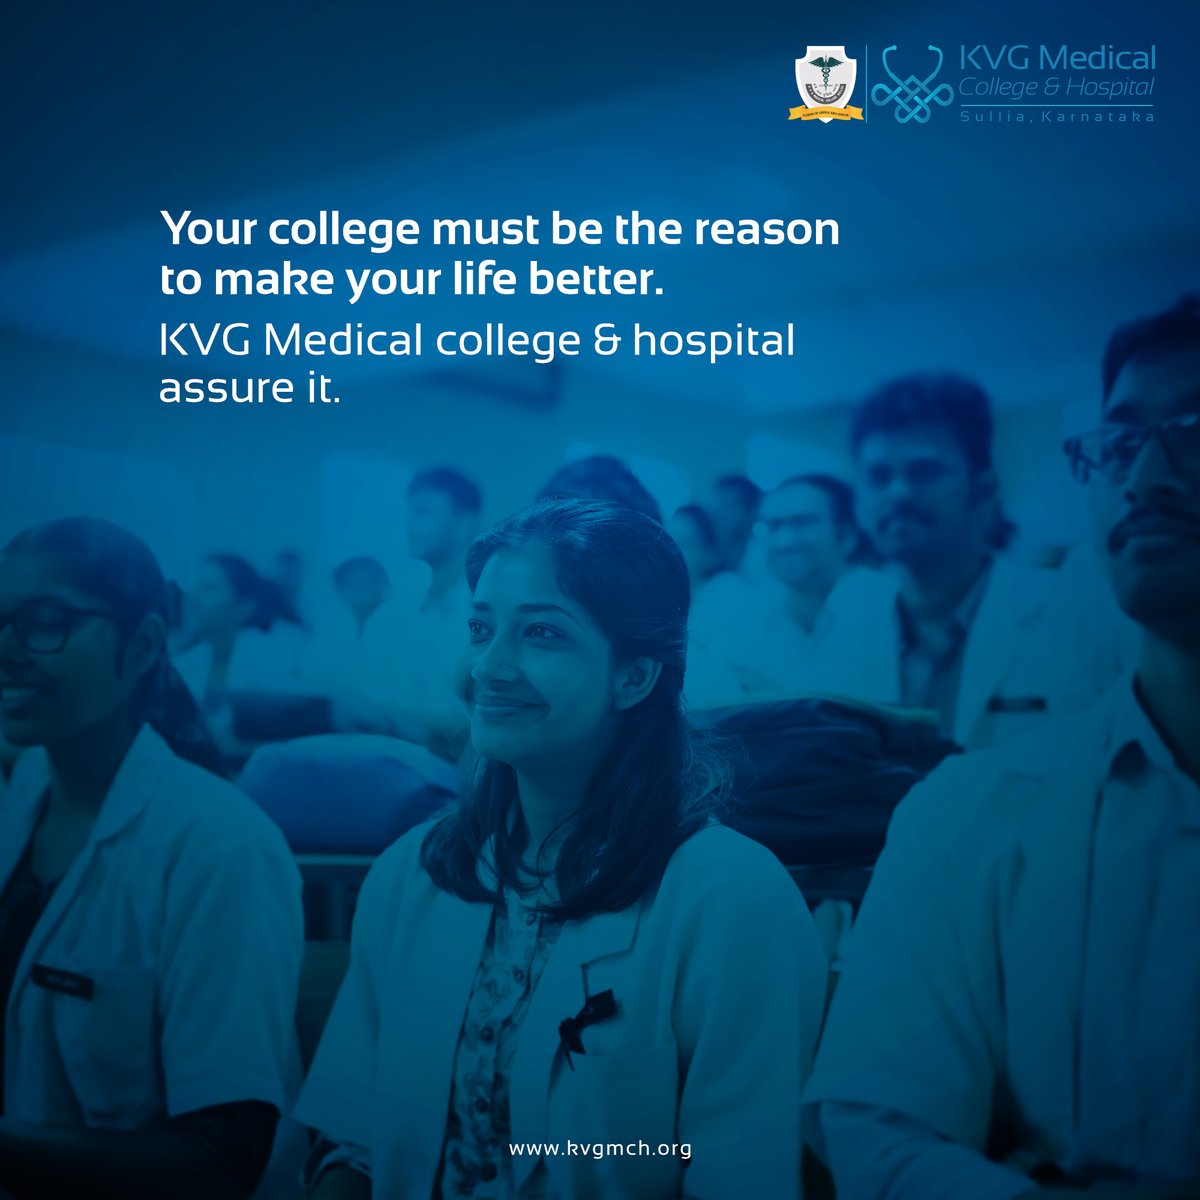 KVG medical college and hospital is a wellequipped campus with over 23 departments,highly qualified doctors, great patient input and medical services. We also provide diet services, Nursing services,Duty doctors,Security services, relationship and management services, fire safety